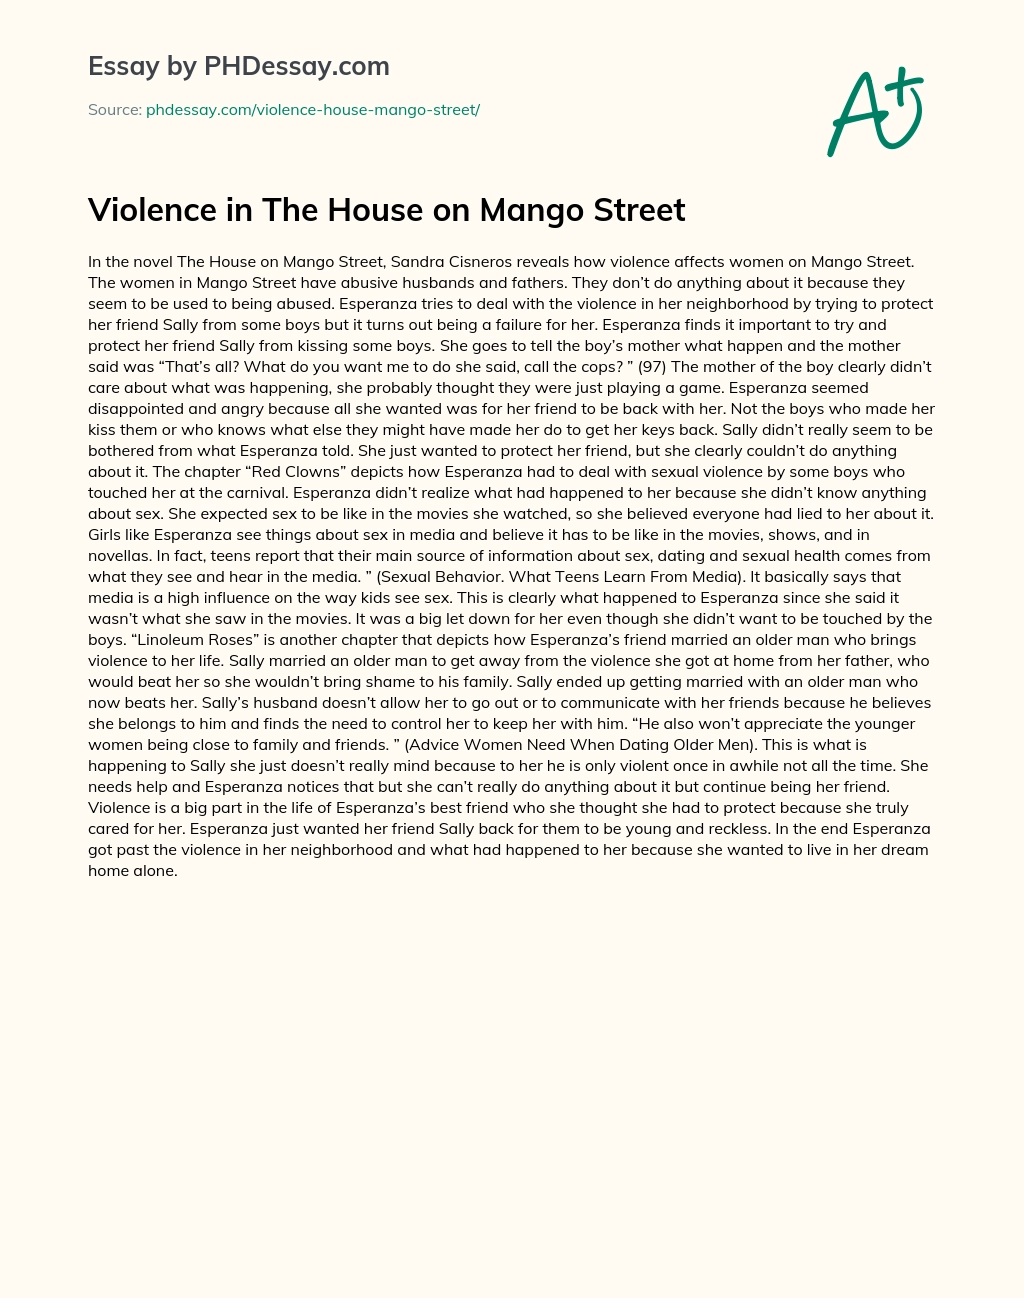 Violence in The House on Mango Street essay